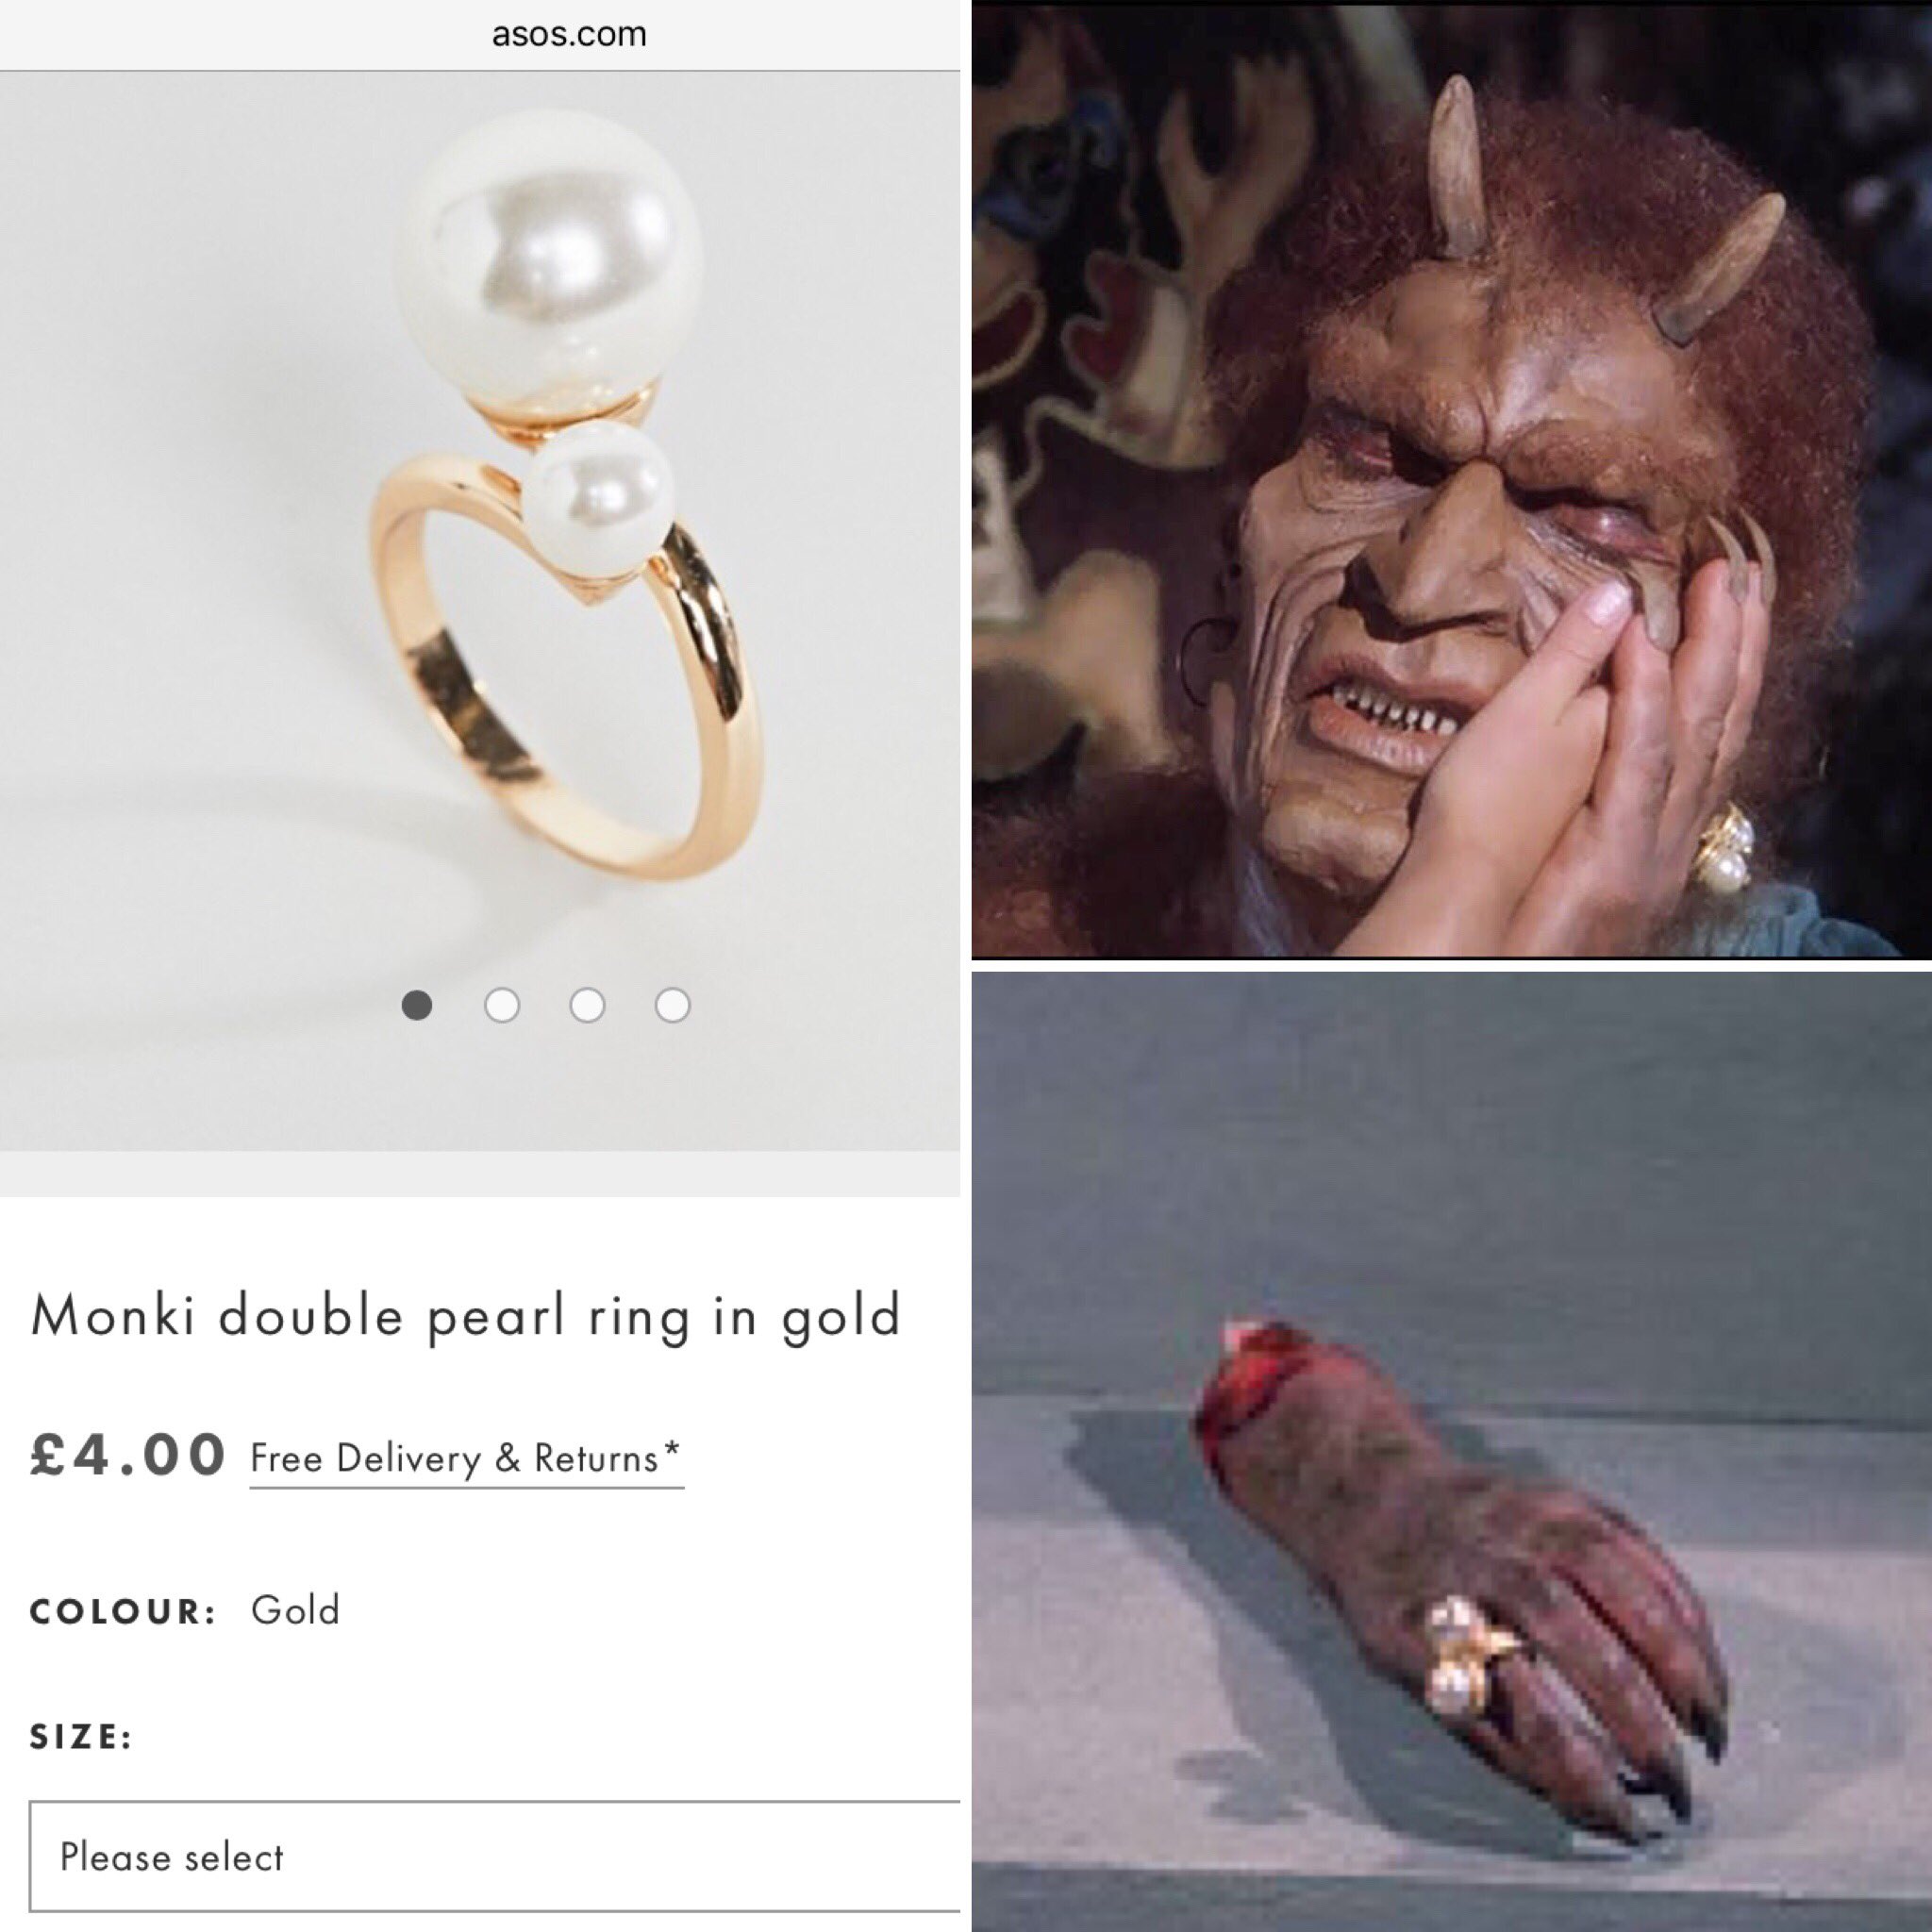 Automatisch Hassy Nauwgezet mojocrumpet on Twitter: "Asos are selling the ring of, Calibos, for £4.  This could have saved a lot of bloodshed #clashofthetitans  https://t.co/ZksIA8MKFd" / Twitter